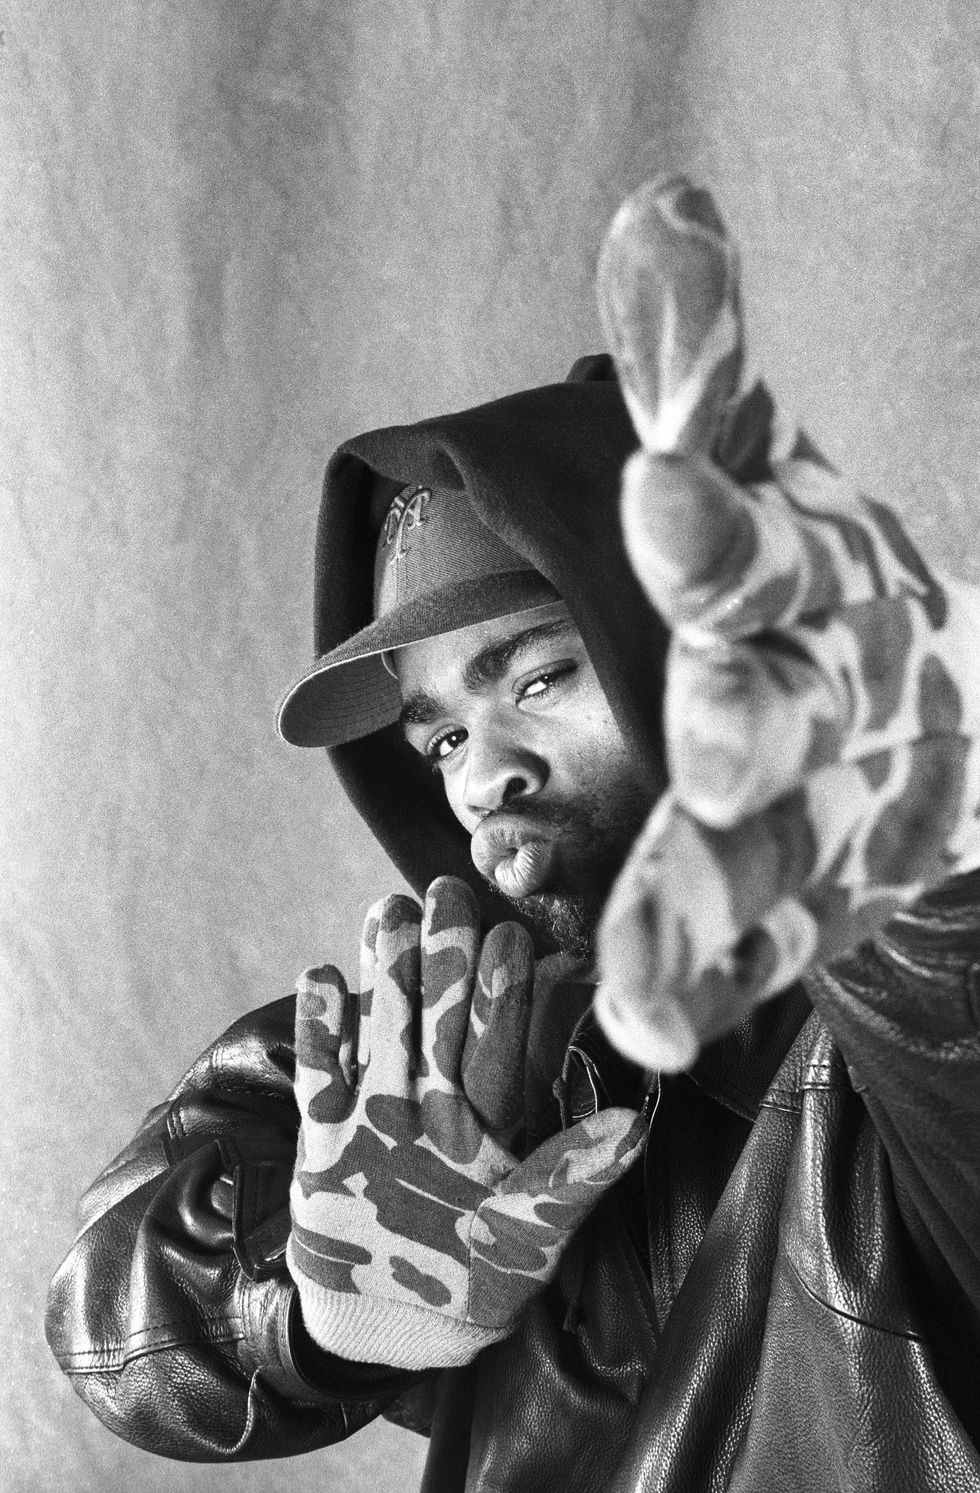 rapper method man poses for a portrait session in november 1993 in new york, new york photo by al pereiramichael ochs archivesgetty images